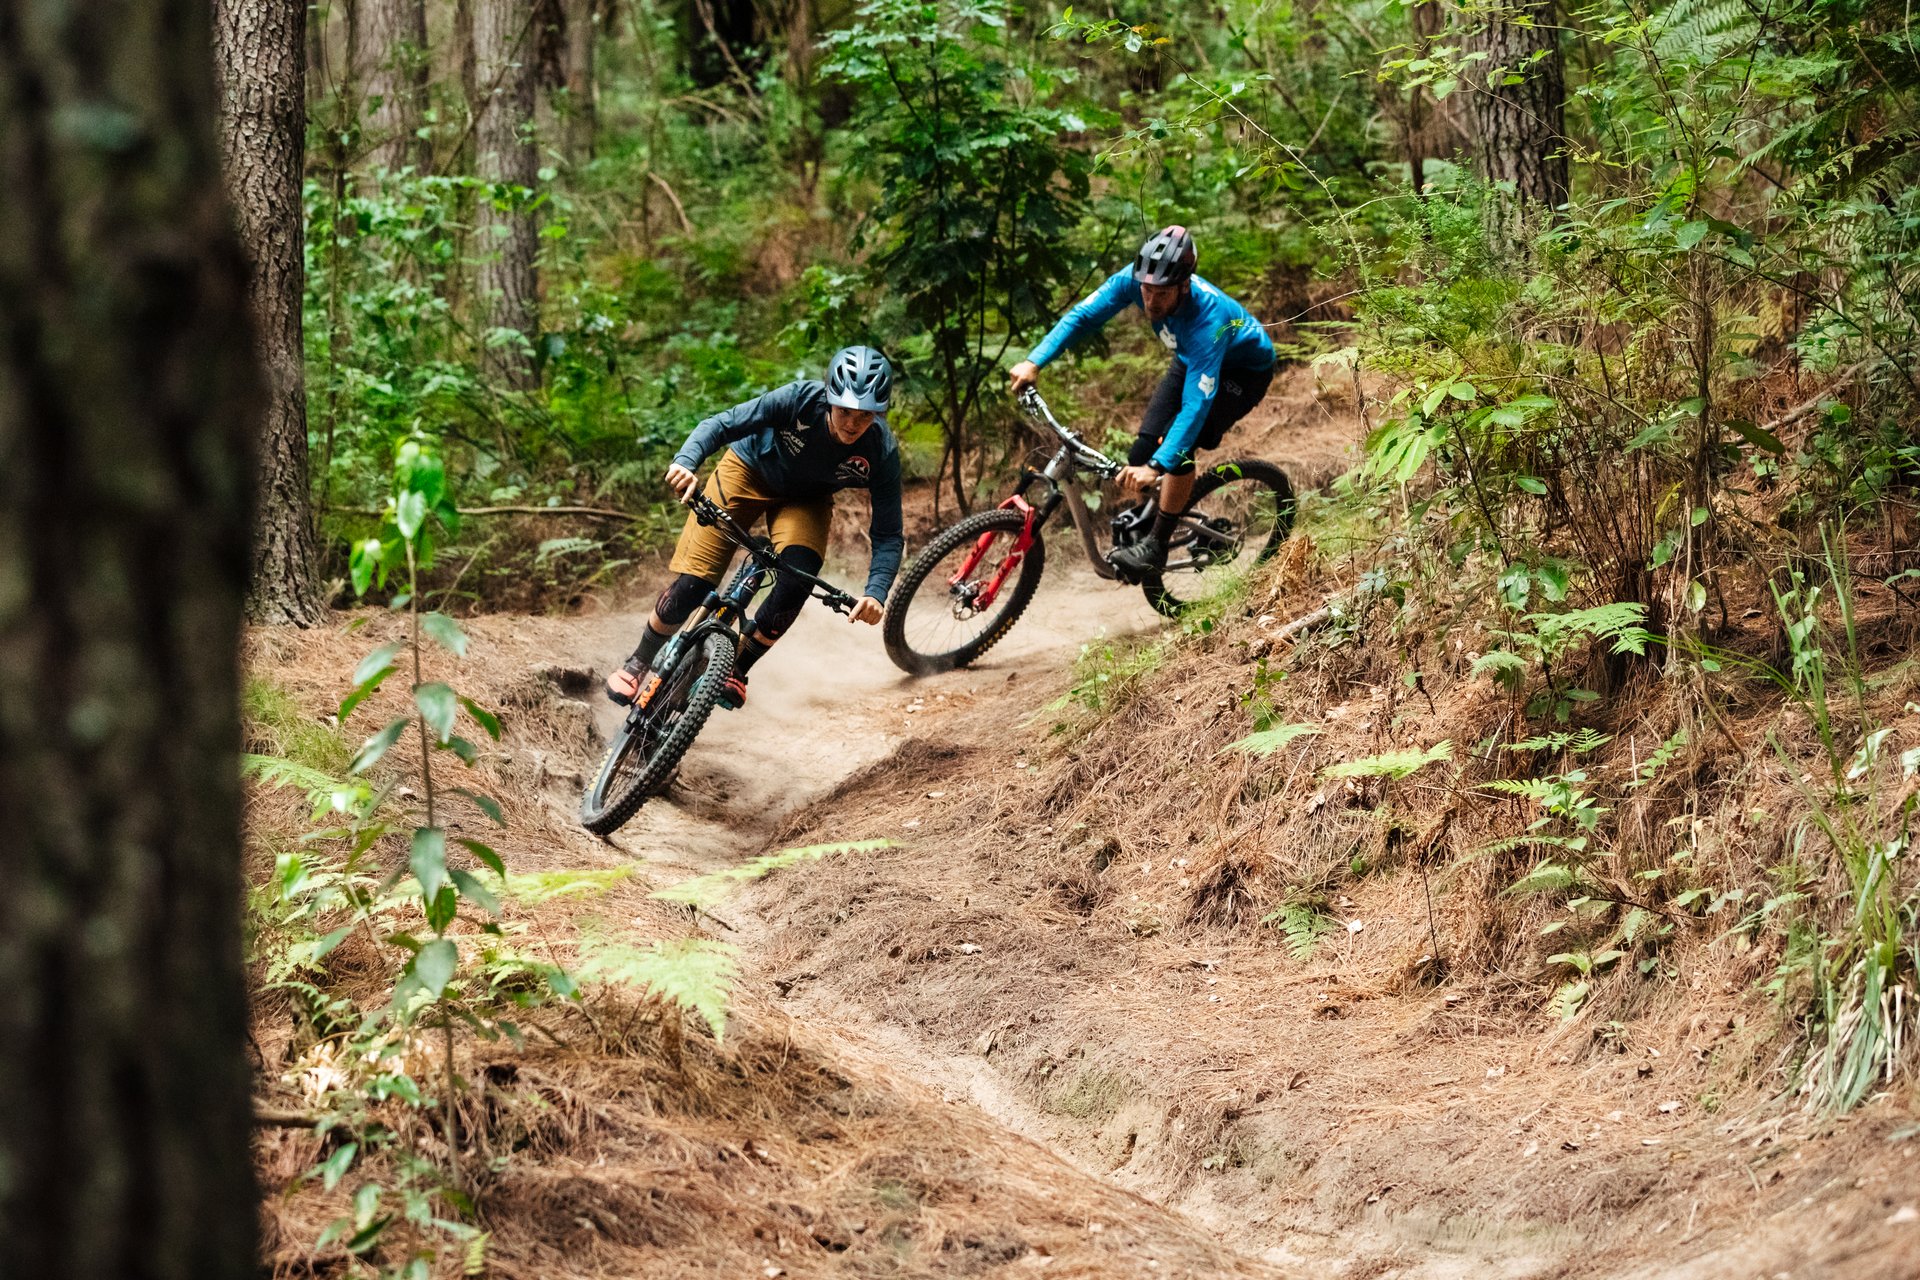 Bas van Steenbergen and Vaea Verbeeck riding Craters MTB Park in Taupo